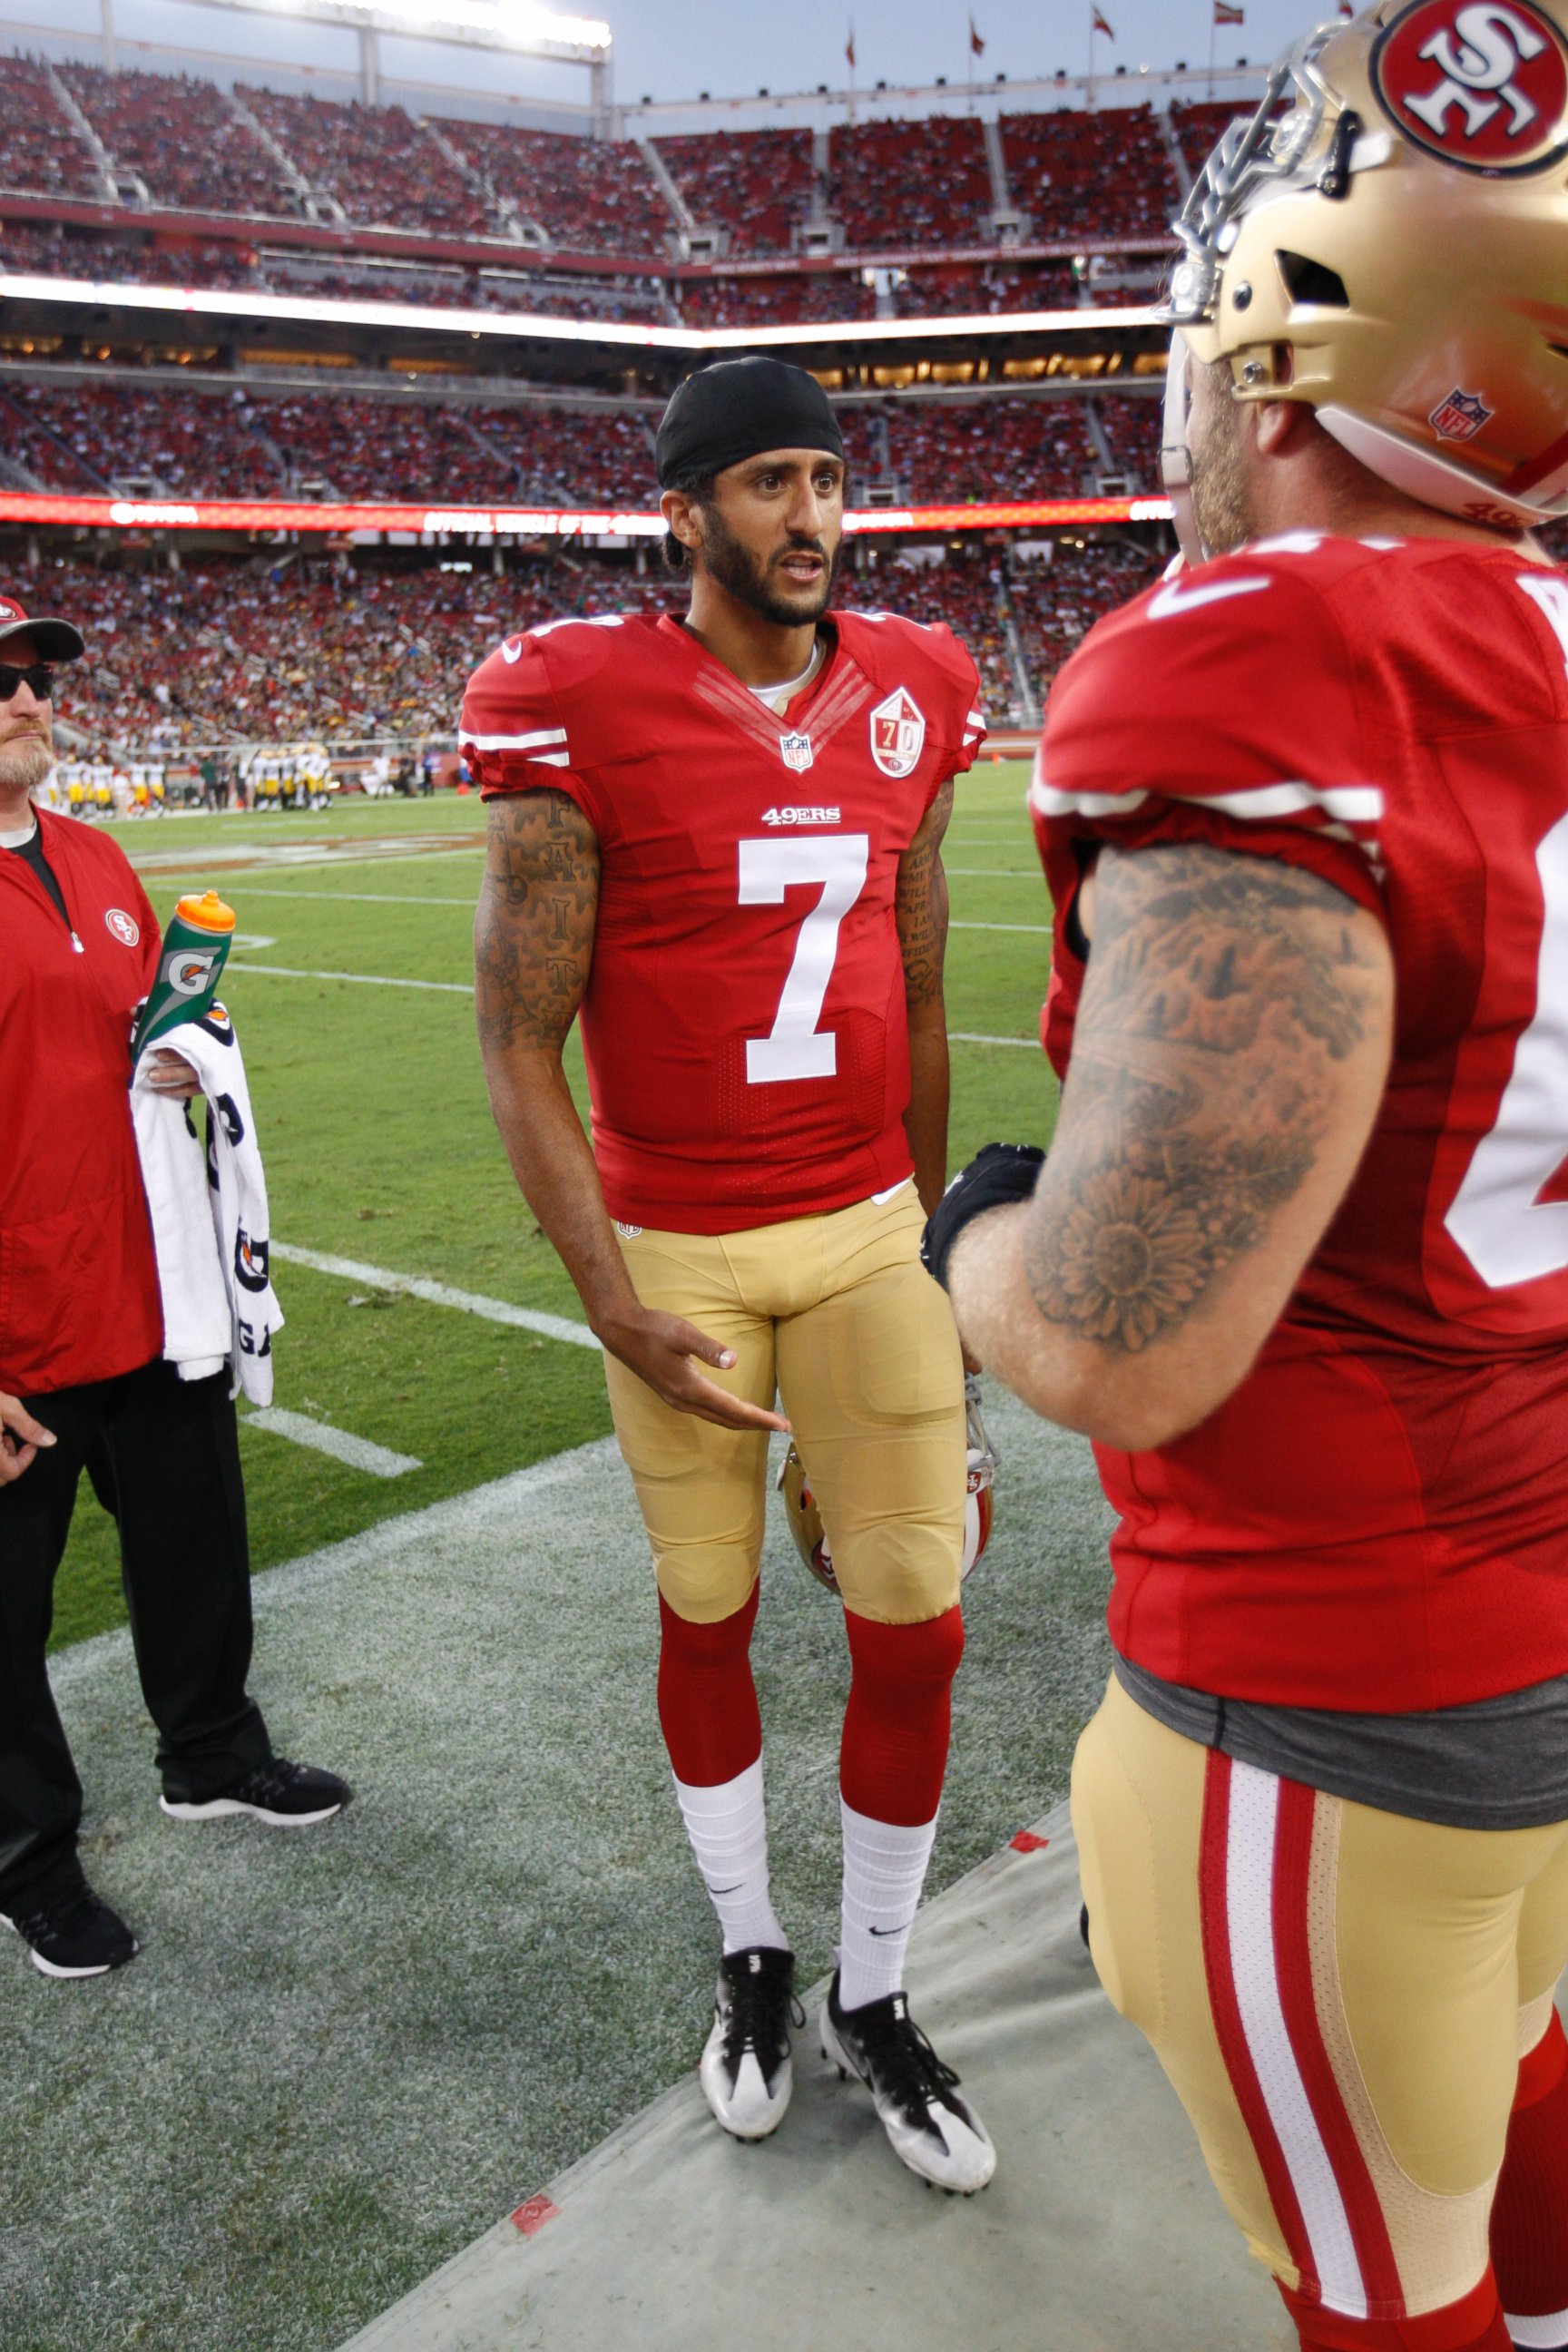 PHOTO: Colin Kaepernick of the San Francisco 49ers stands on the sideline prior to the game against the Green Bay Packers at Levi Stadium on Aug. 26, 2016 in Santa Clara, California.